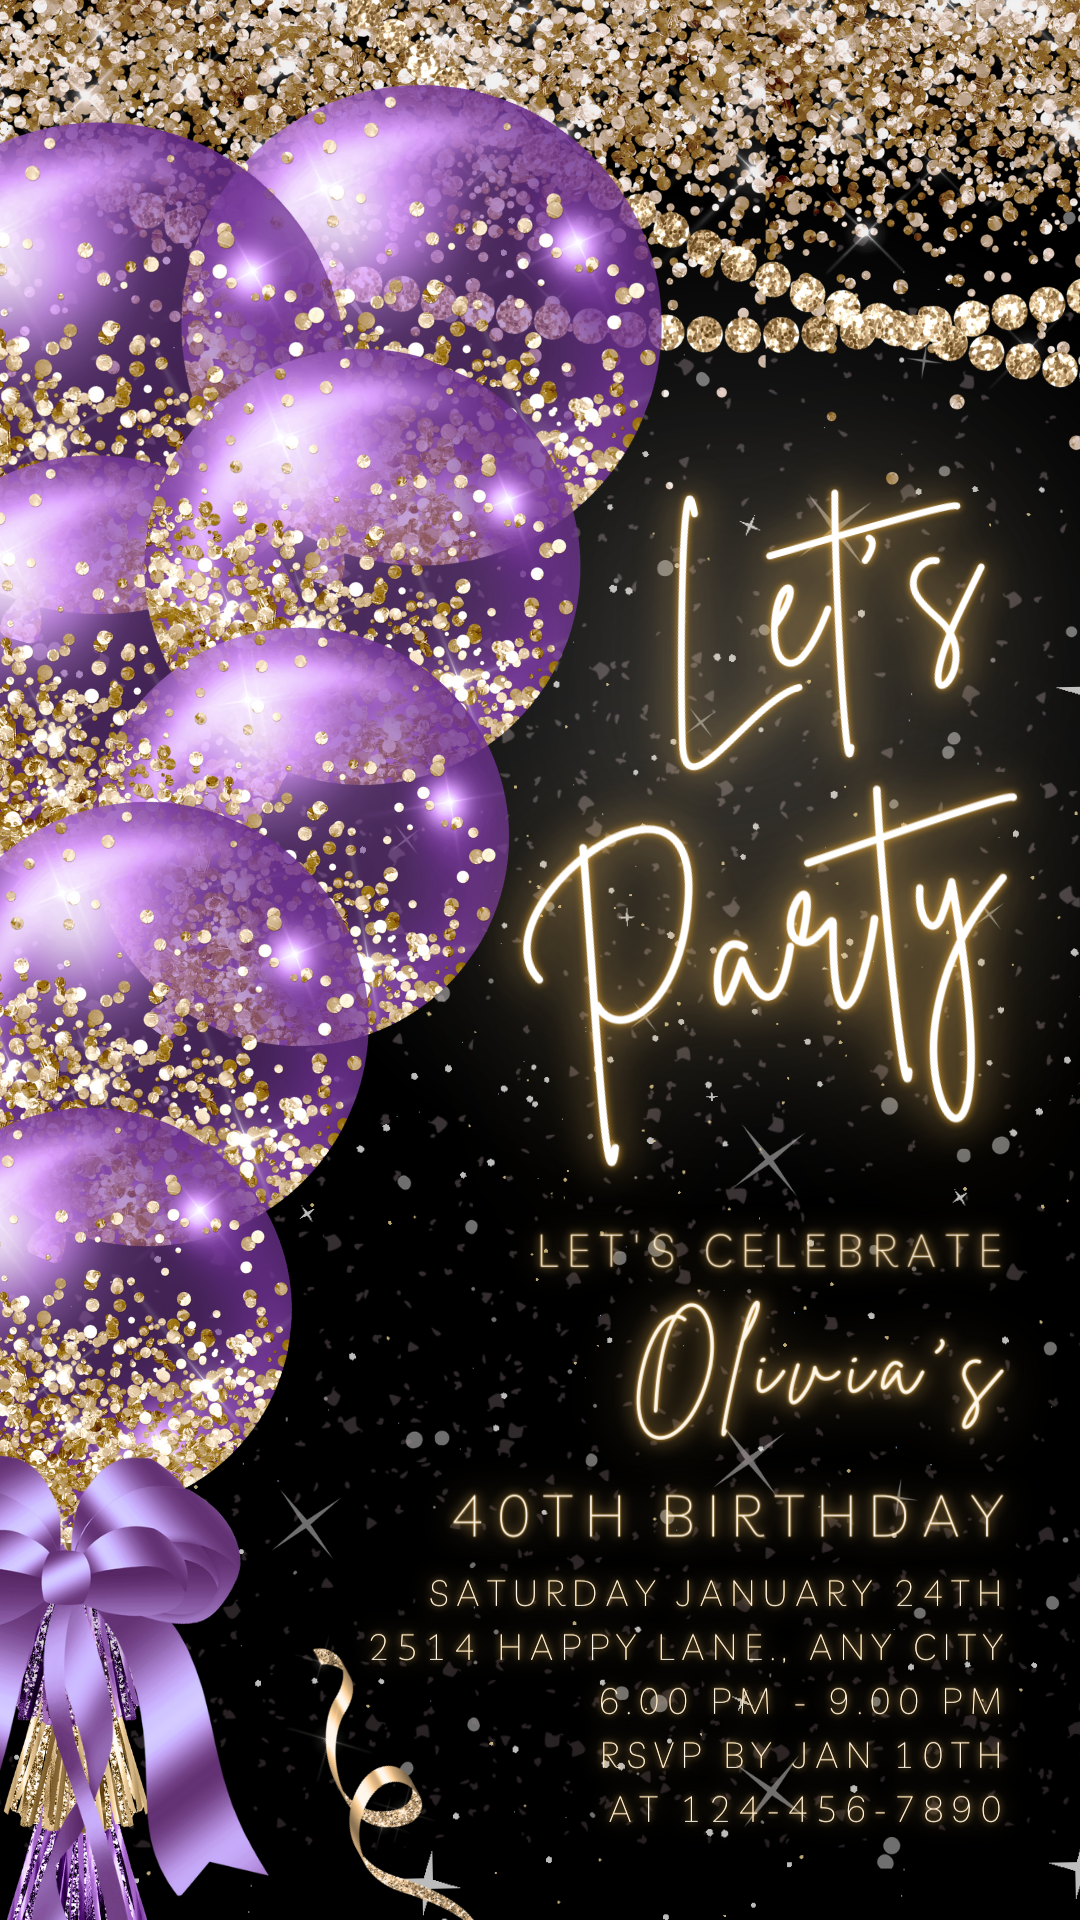 Animated Let's Party invitation, Purple Glittery Dance Night Invite for any Event Celebration, Editable Video Birthday Template